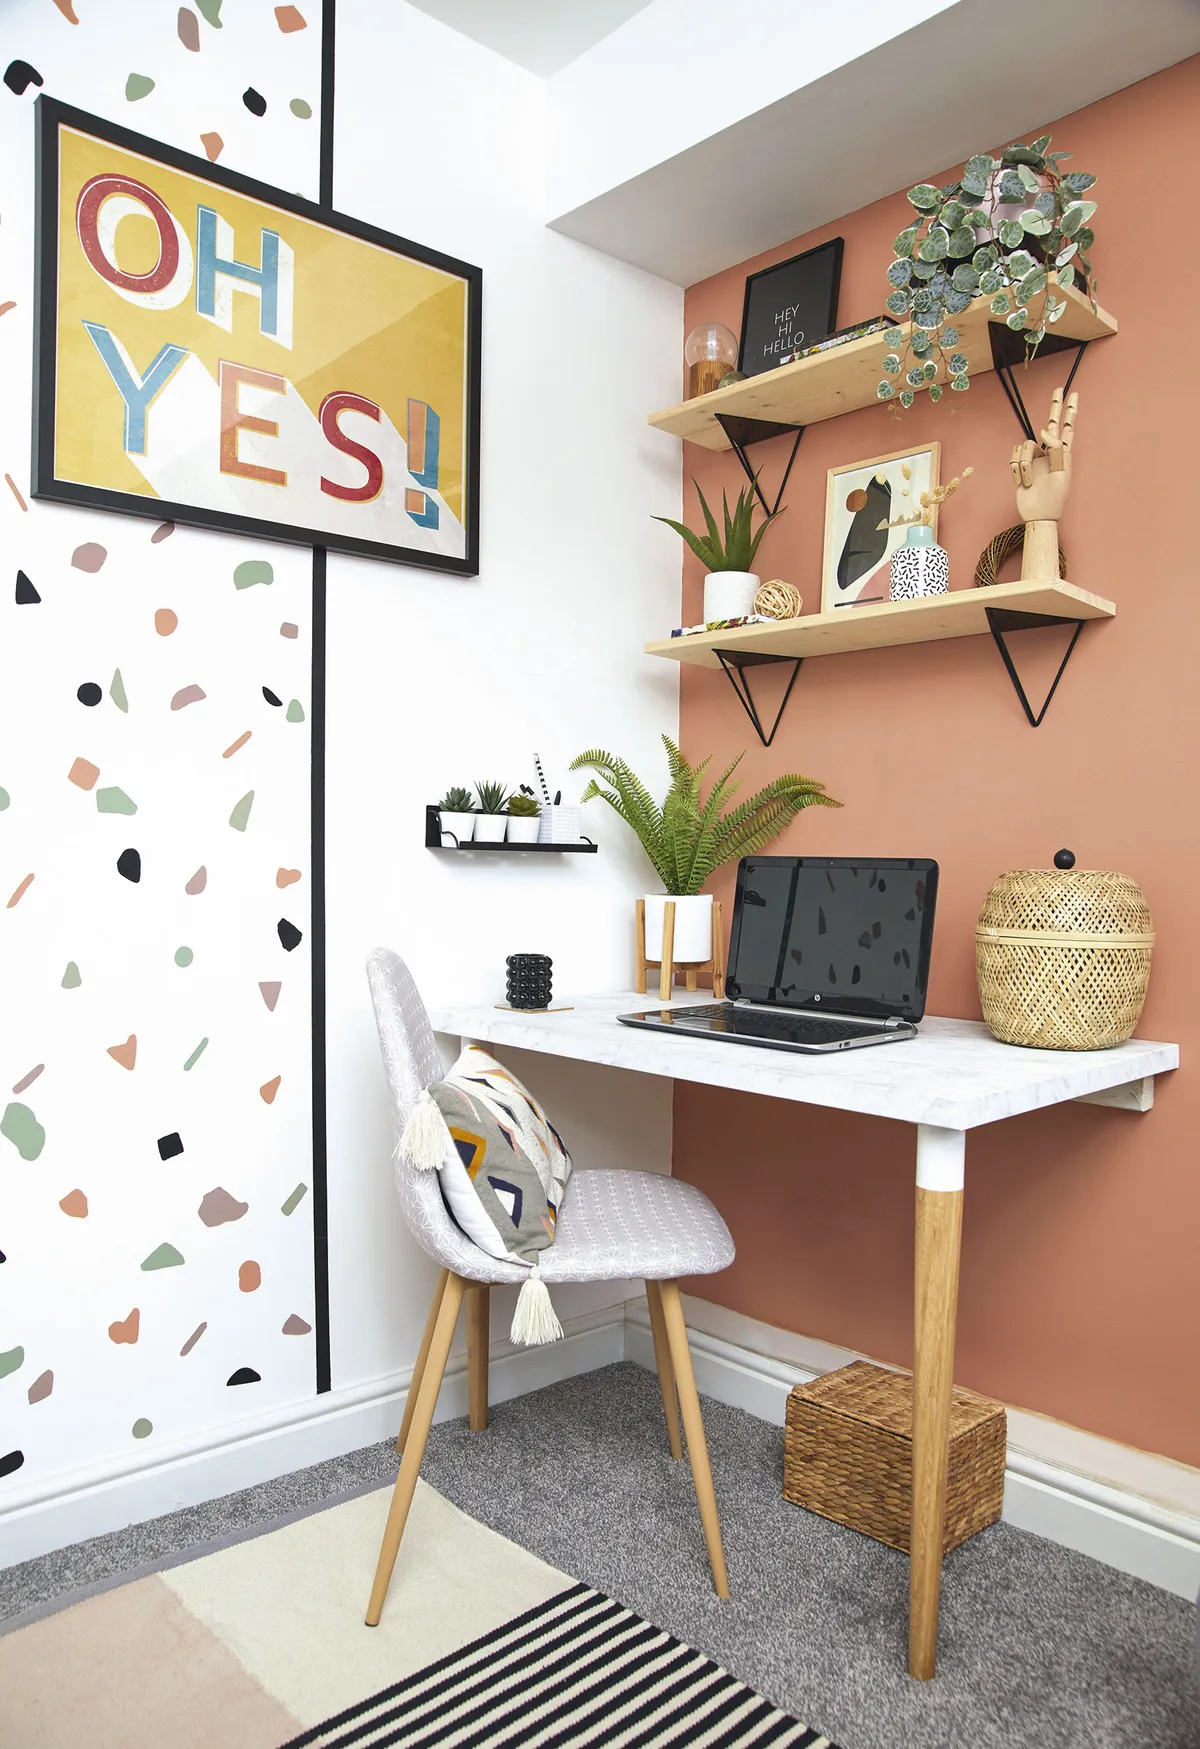 ‘The desk is made from an IKEA tabletop that I wrapped in marble-effect vinyl, and then we added two legs and attached it to the wall. The wall is painted in Copper Blush by Dulux and I bought the ‘Oh Yes’ print in the sale from Next years ago – it’s finally found its place on this wall!’